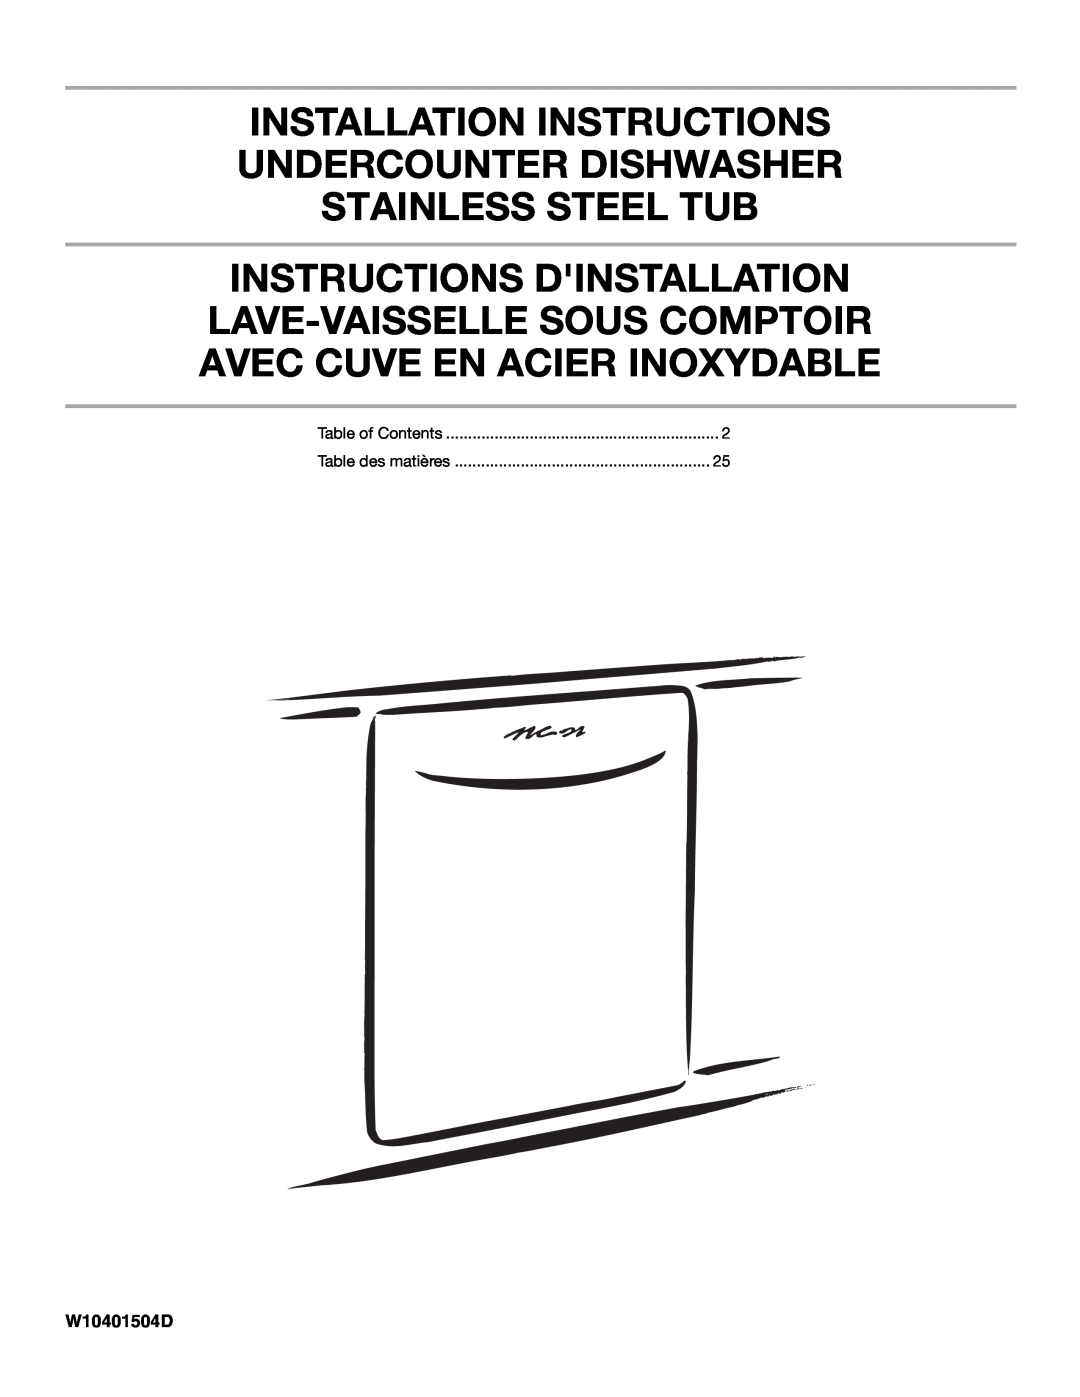 Maytag W10401504D installation instructions Installation Instructions Undercounter Dishwasher Stainless Steel Tub 